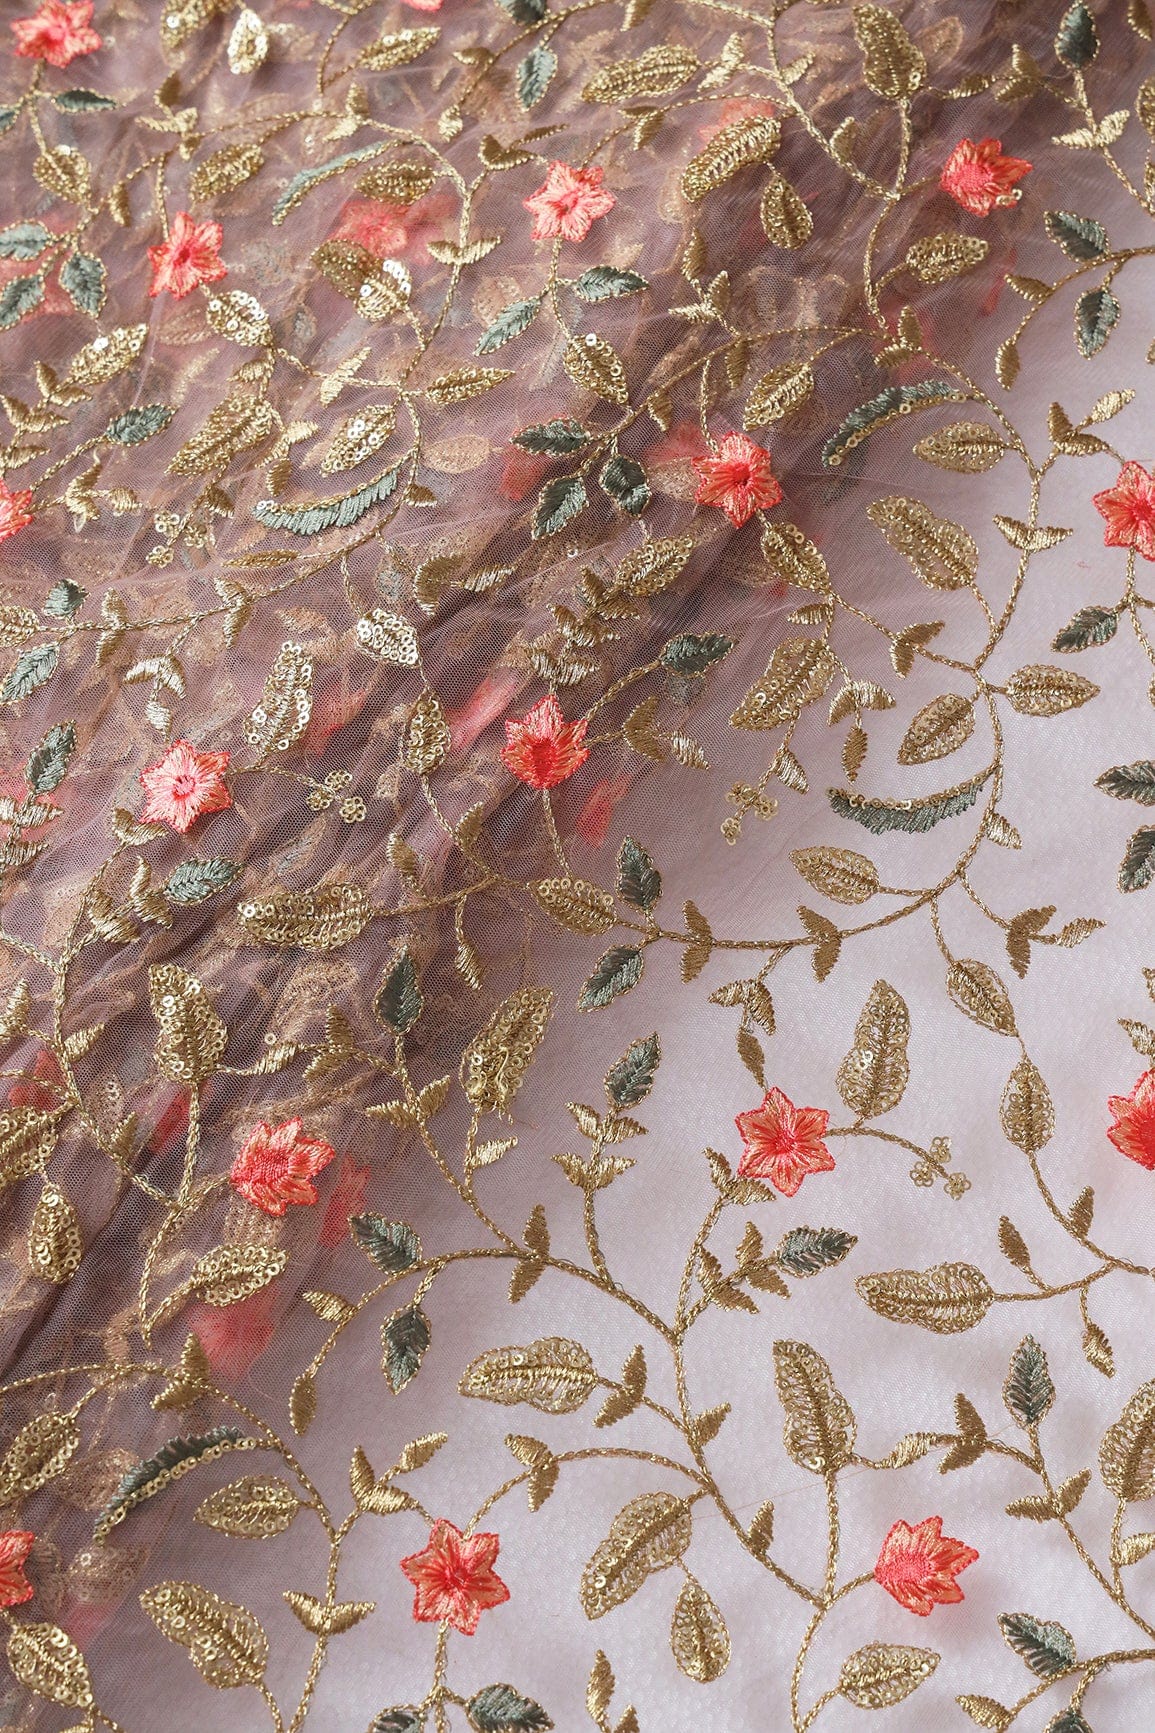 doeraa Embroidery Fabrics Peach And Beige Thread With Gold Sequins Floral Heavy Embroidery Work On Mauve Soft Net Fabric